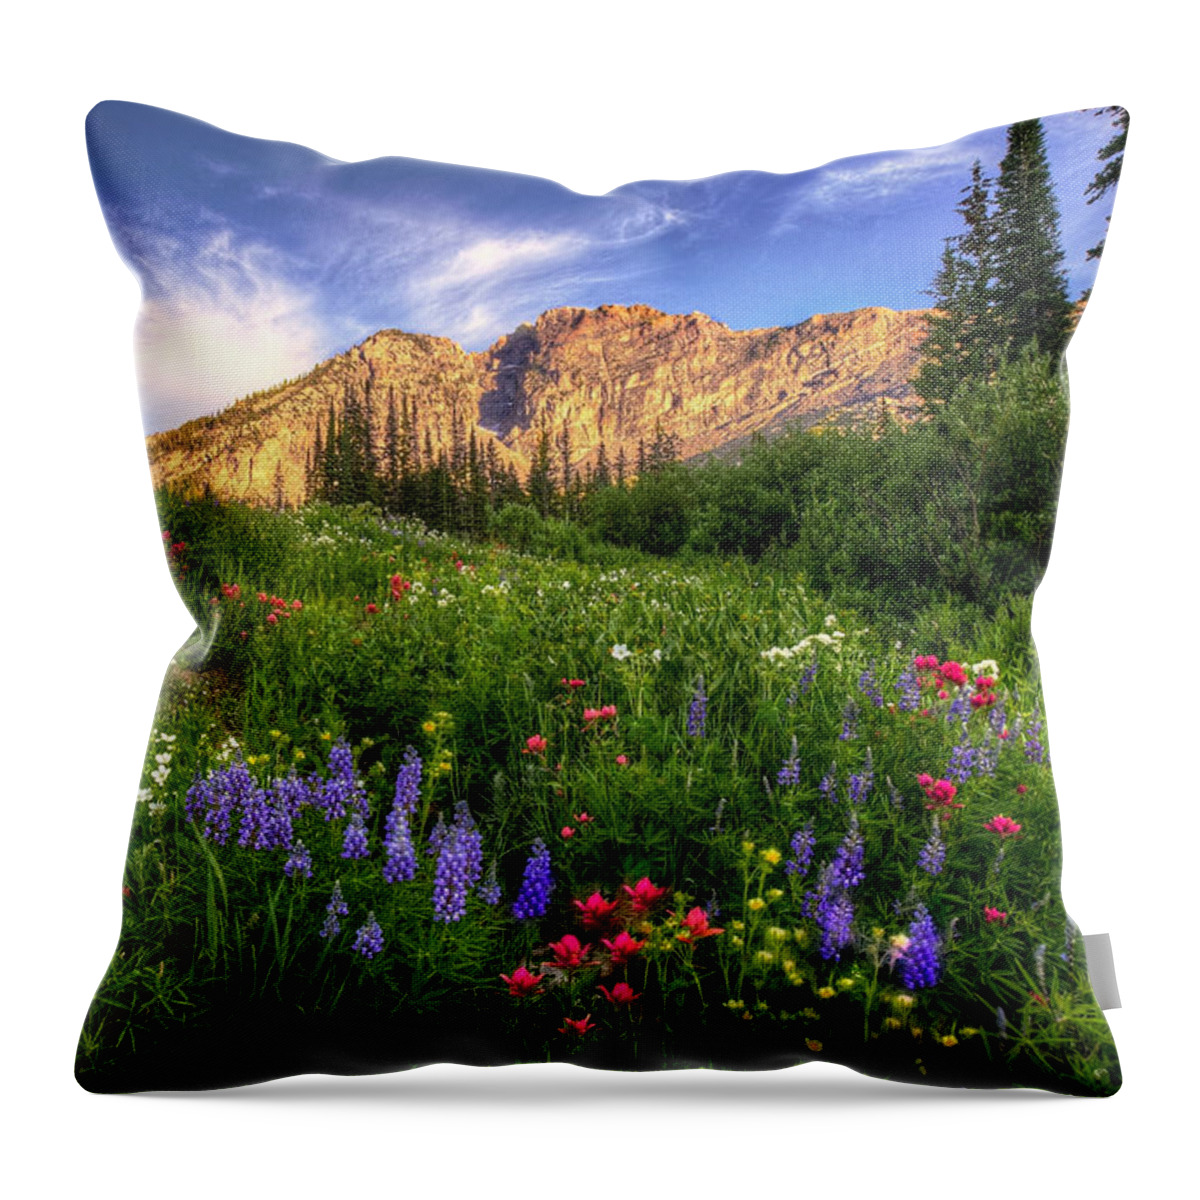 Albion Basin Throw Pillow featuring the photograph The Wild Albion Basin by Ryan Smith